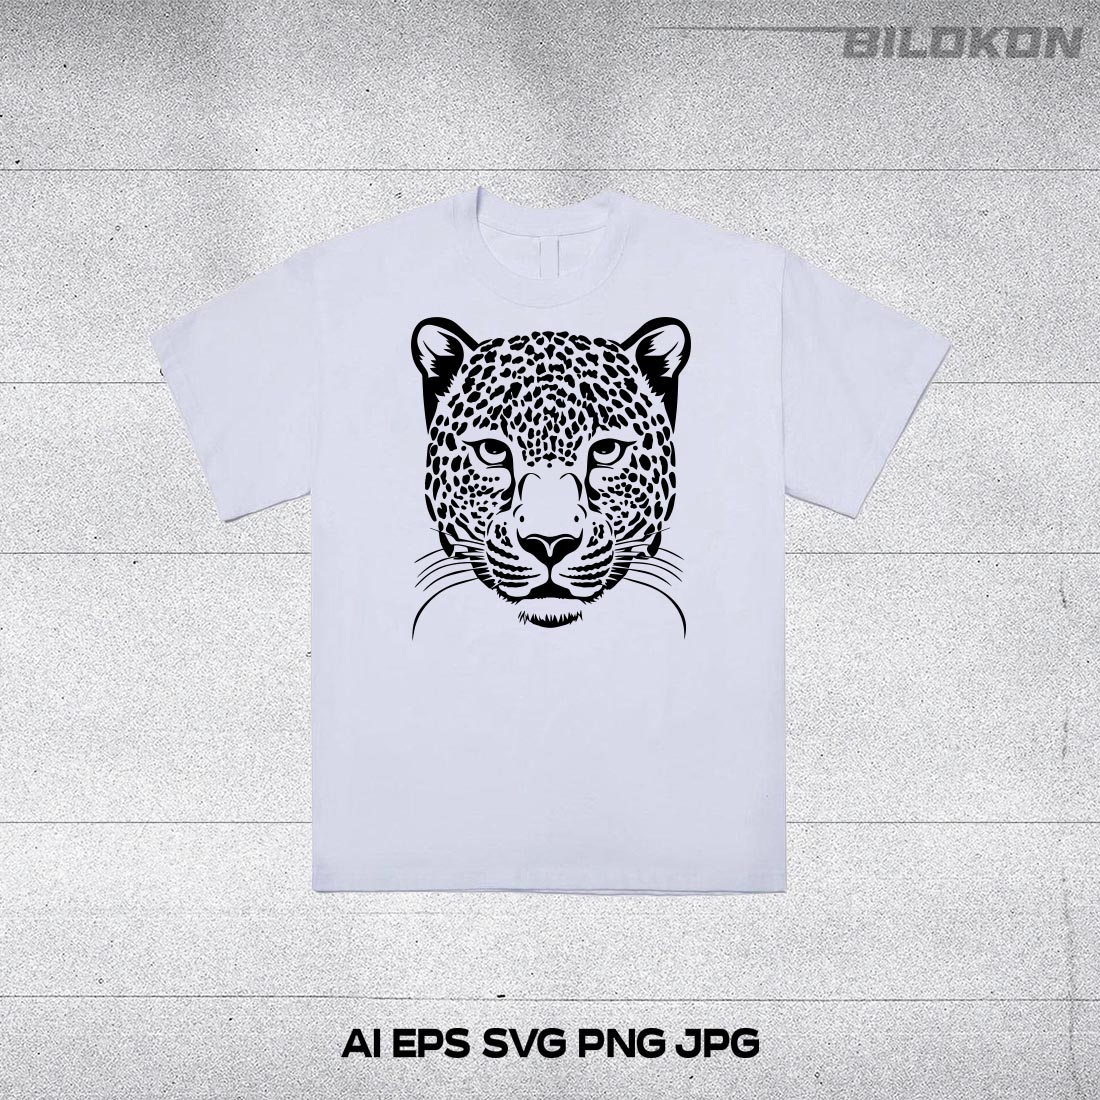 White t - shirt with a black and white image of a leopard.